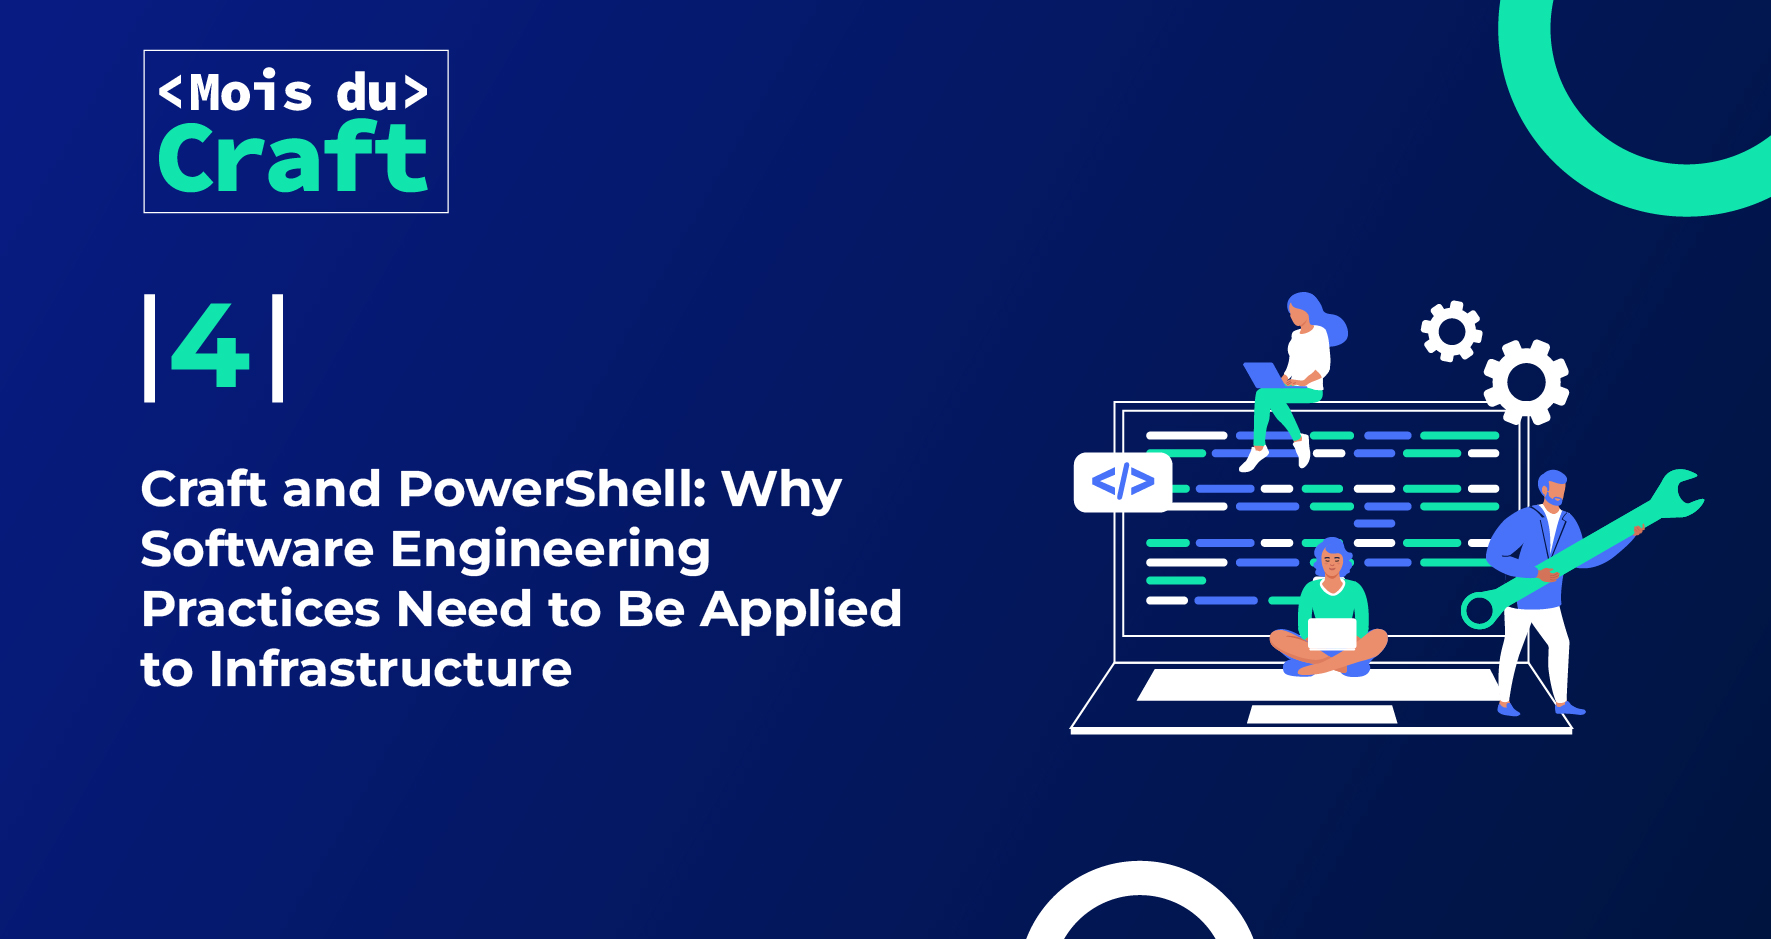 Craft and PowerShell: Why Software Engineering Practices Need to Be Applied to Infrastructure